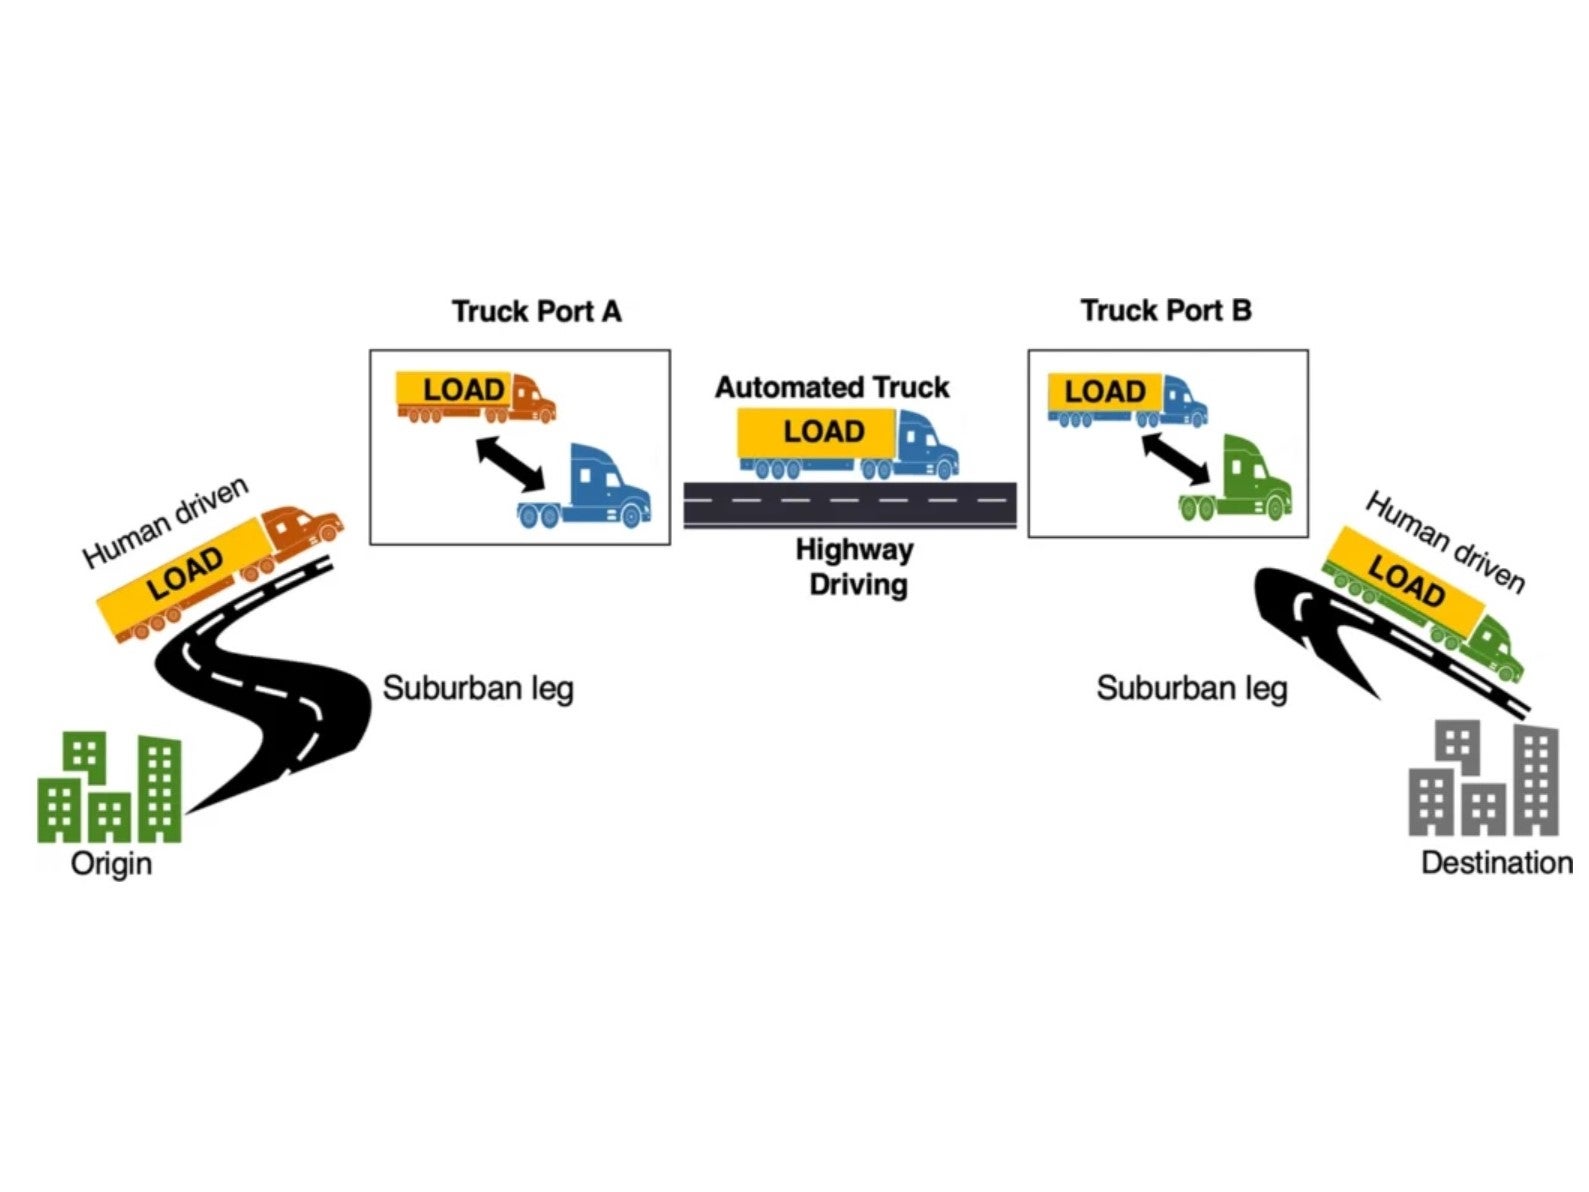 Schematic showing the possible operation of a transfer-hub model where a human driven truck drives the load from the origin to the first truck port where the load is switched to an automated prime mover shown in black